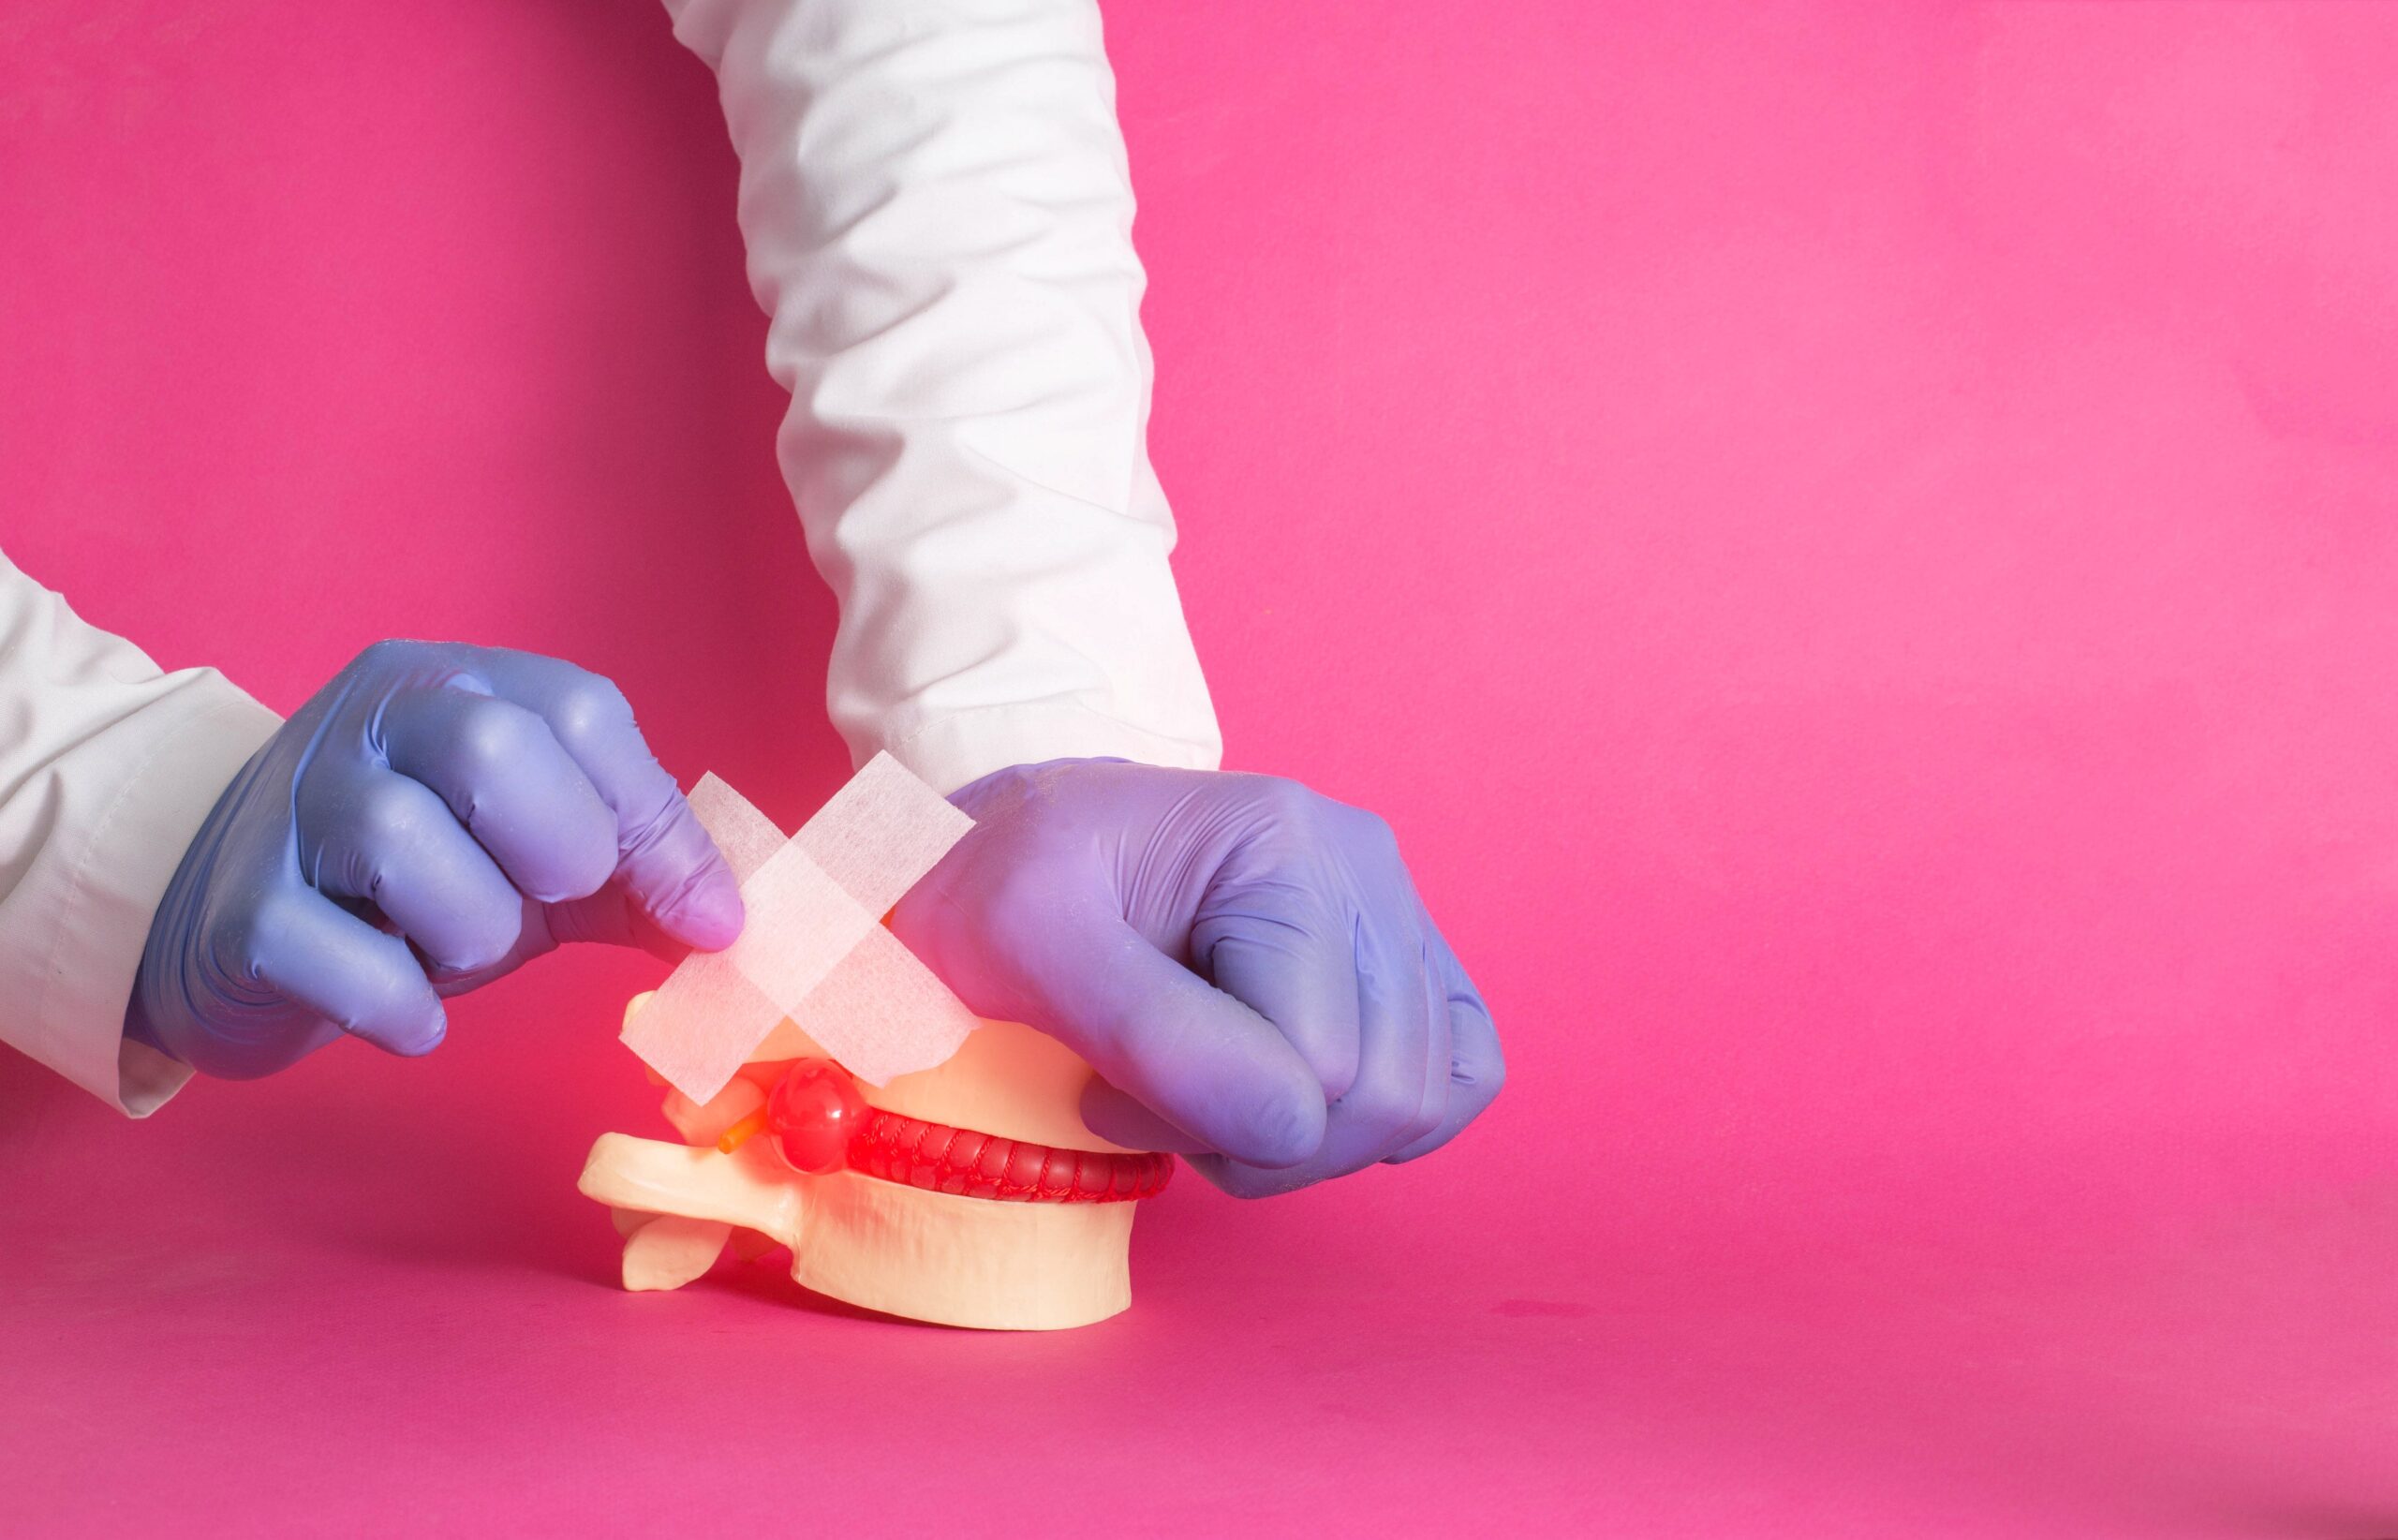 The doctor's hands are gluing a medical plaster on the released nucleus pulposus, intervertebral hernia, pink background. Spondylolisthesis and spondoarthrosis treatment concept, copy space for text